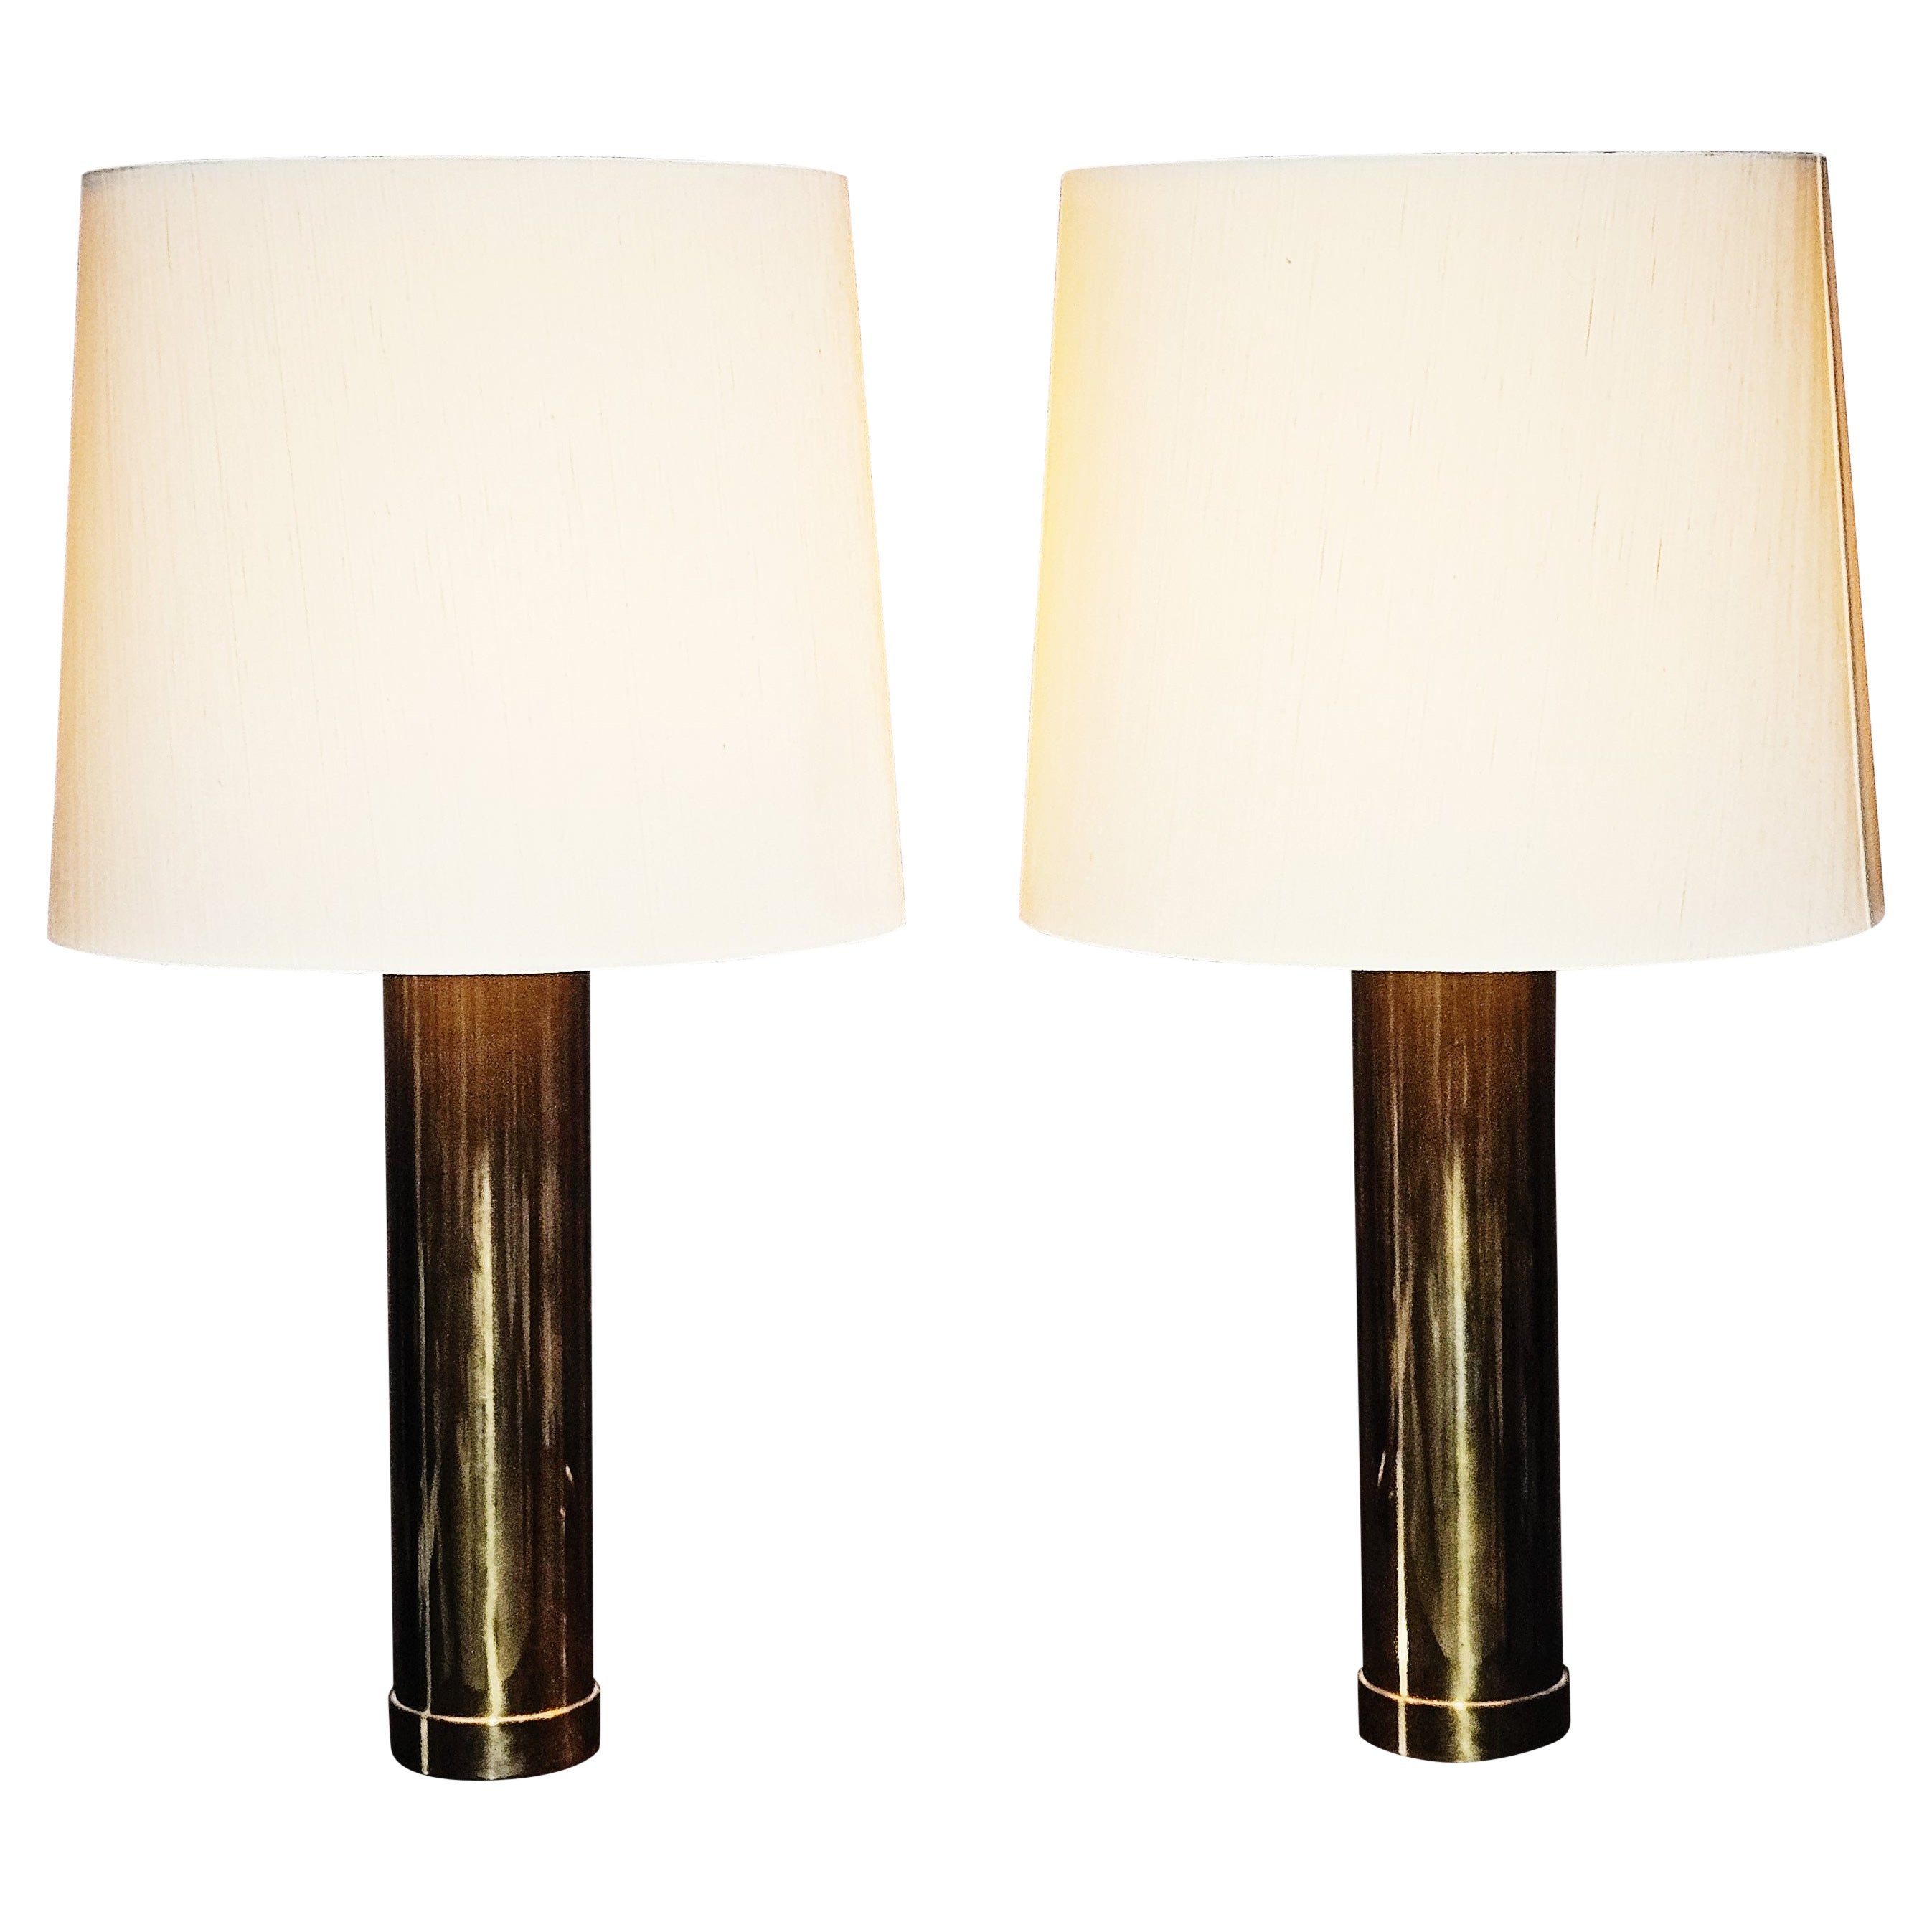 Pair of brass table lamps 'B-09' by Bergboms, Sweden, 1960s